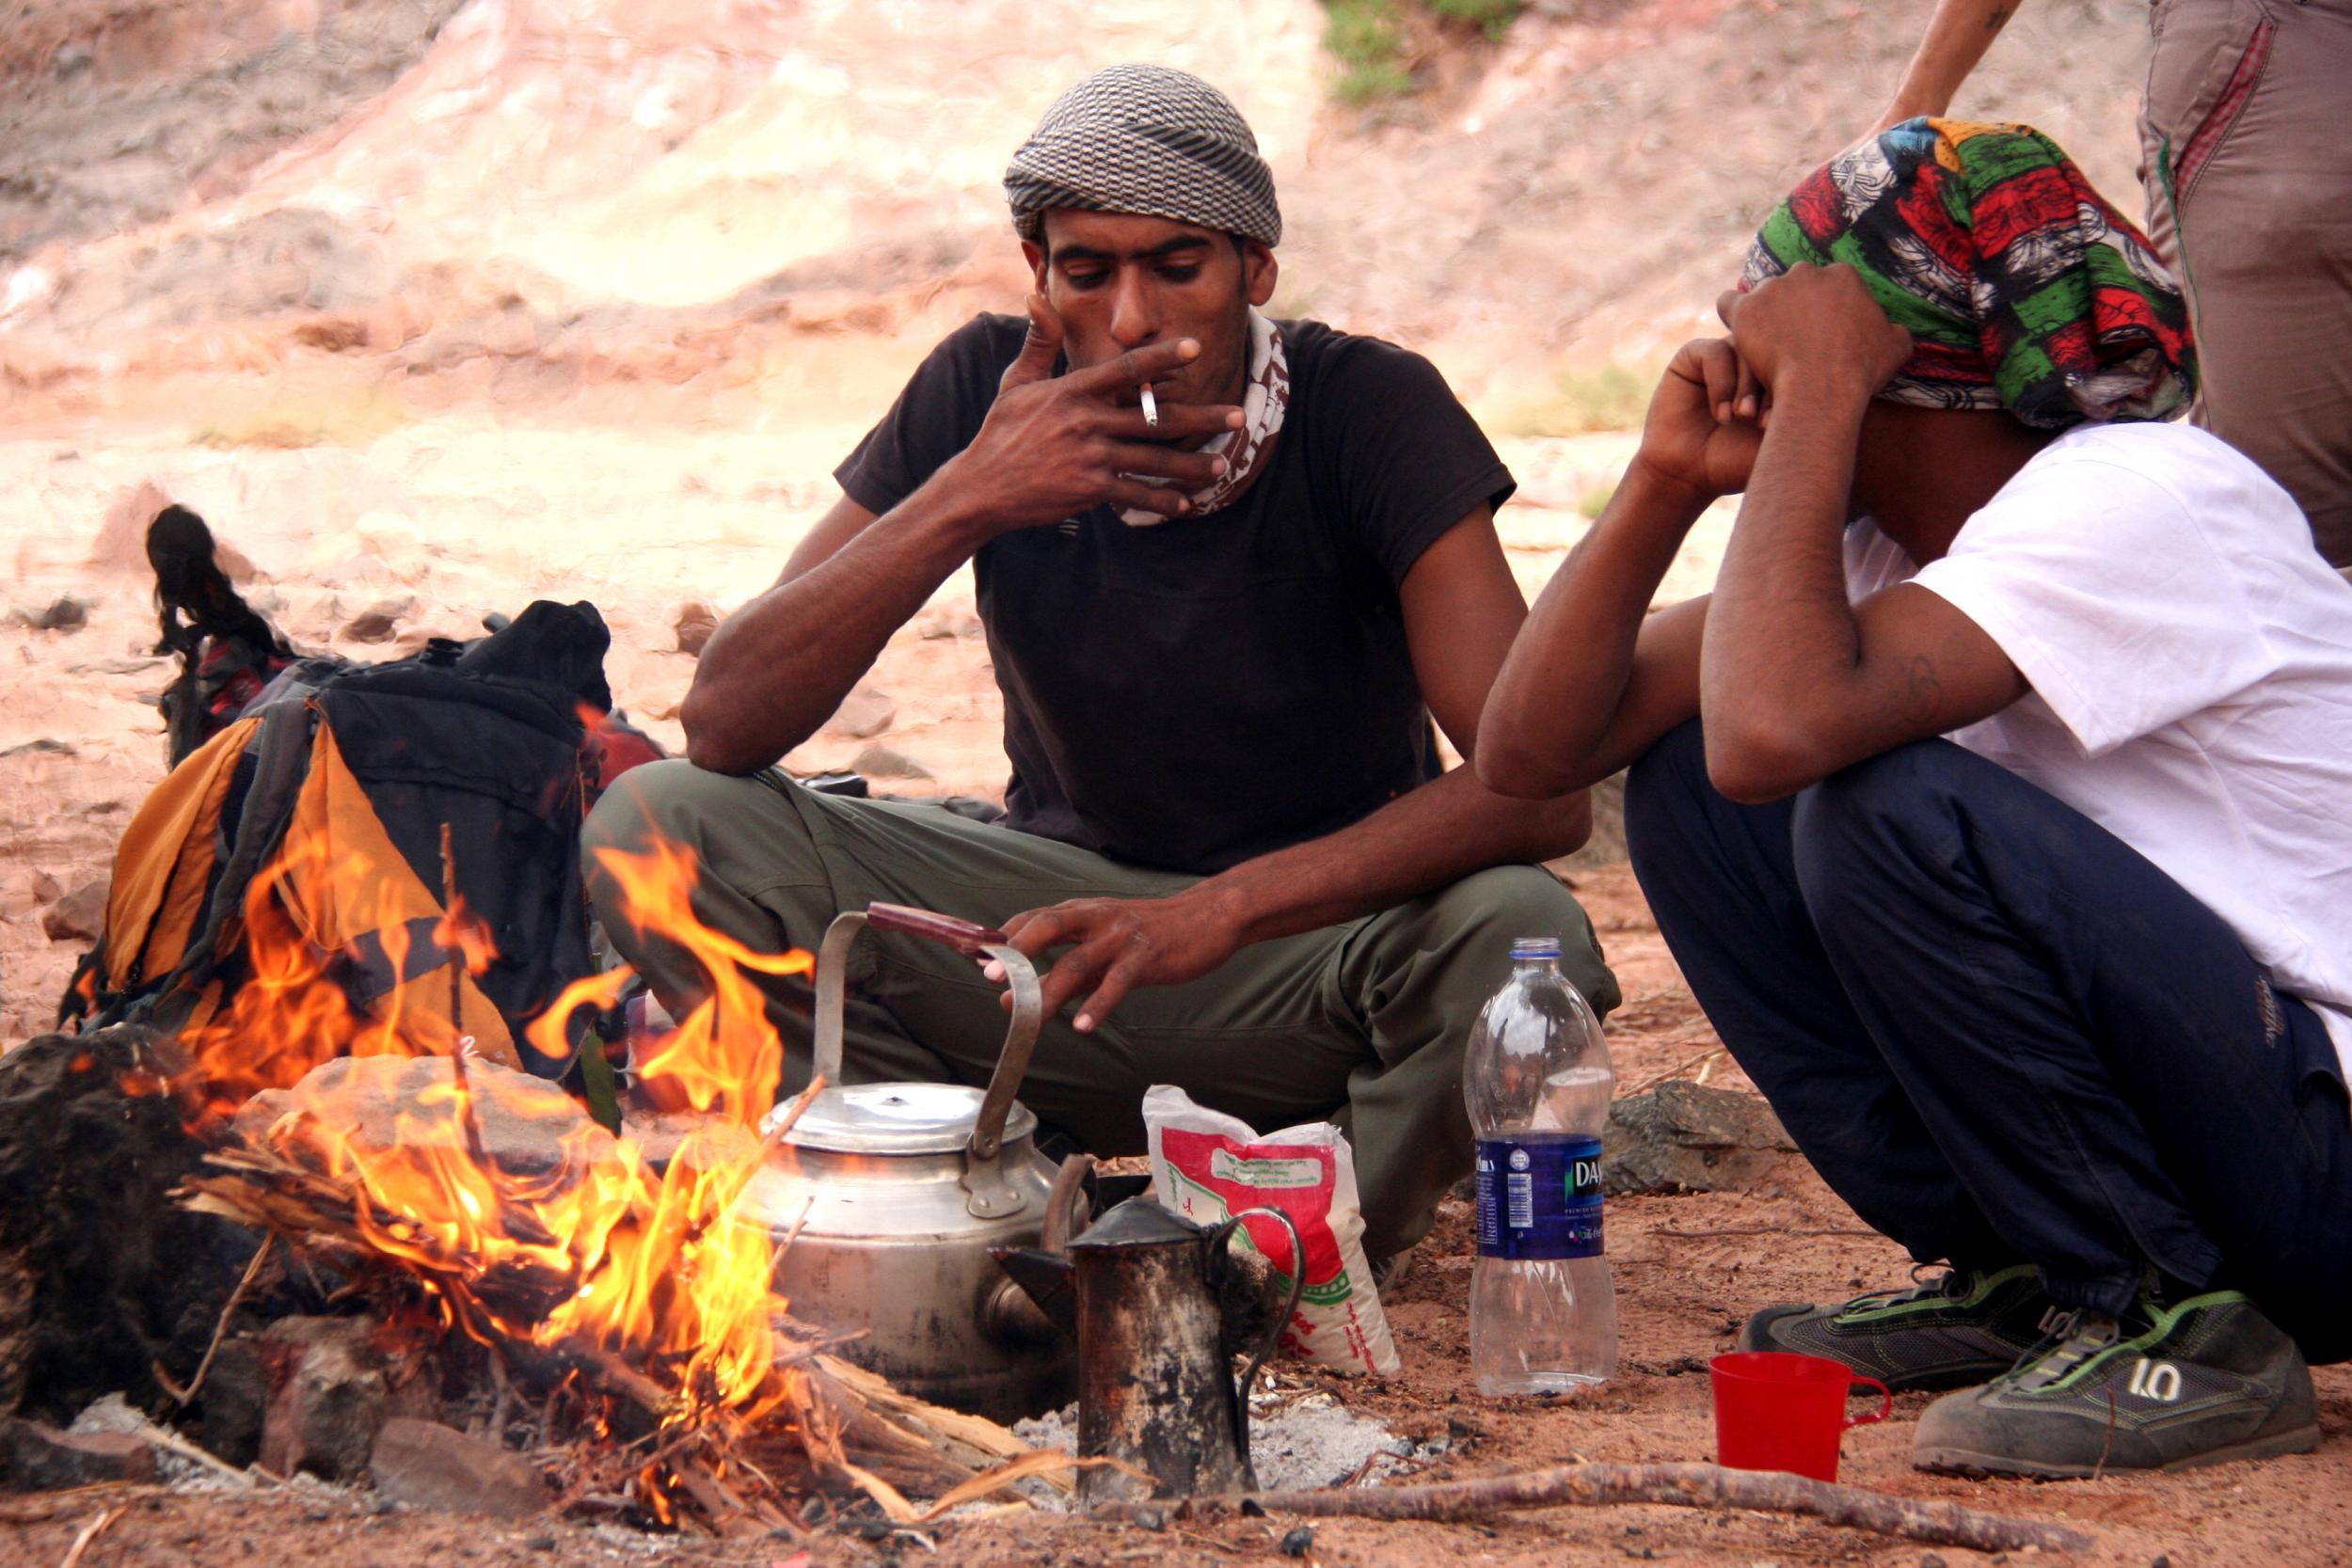 &#13;
Surefooted Jordanians Mohamed and Mohamed rest up with sweet tea and cigarettes &#13;